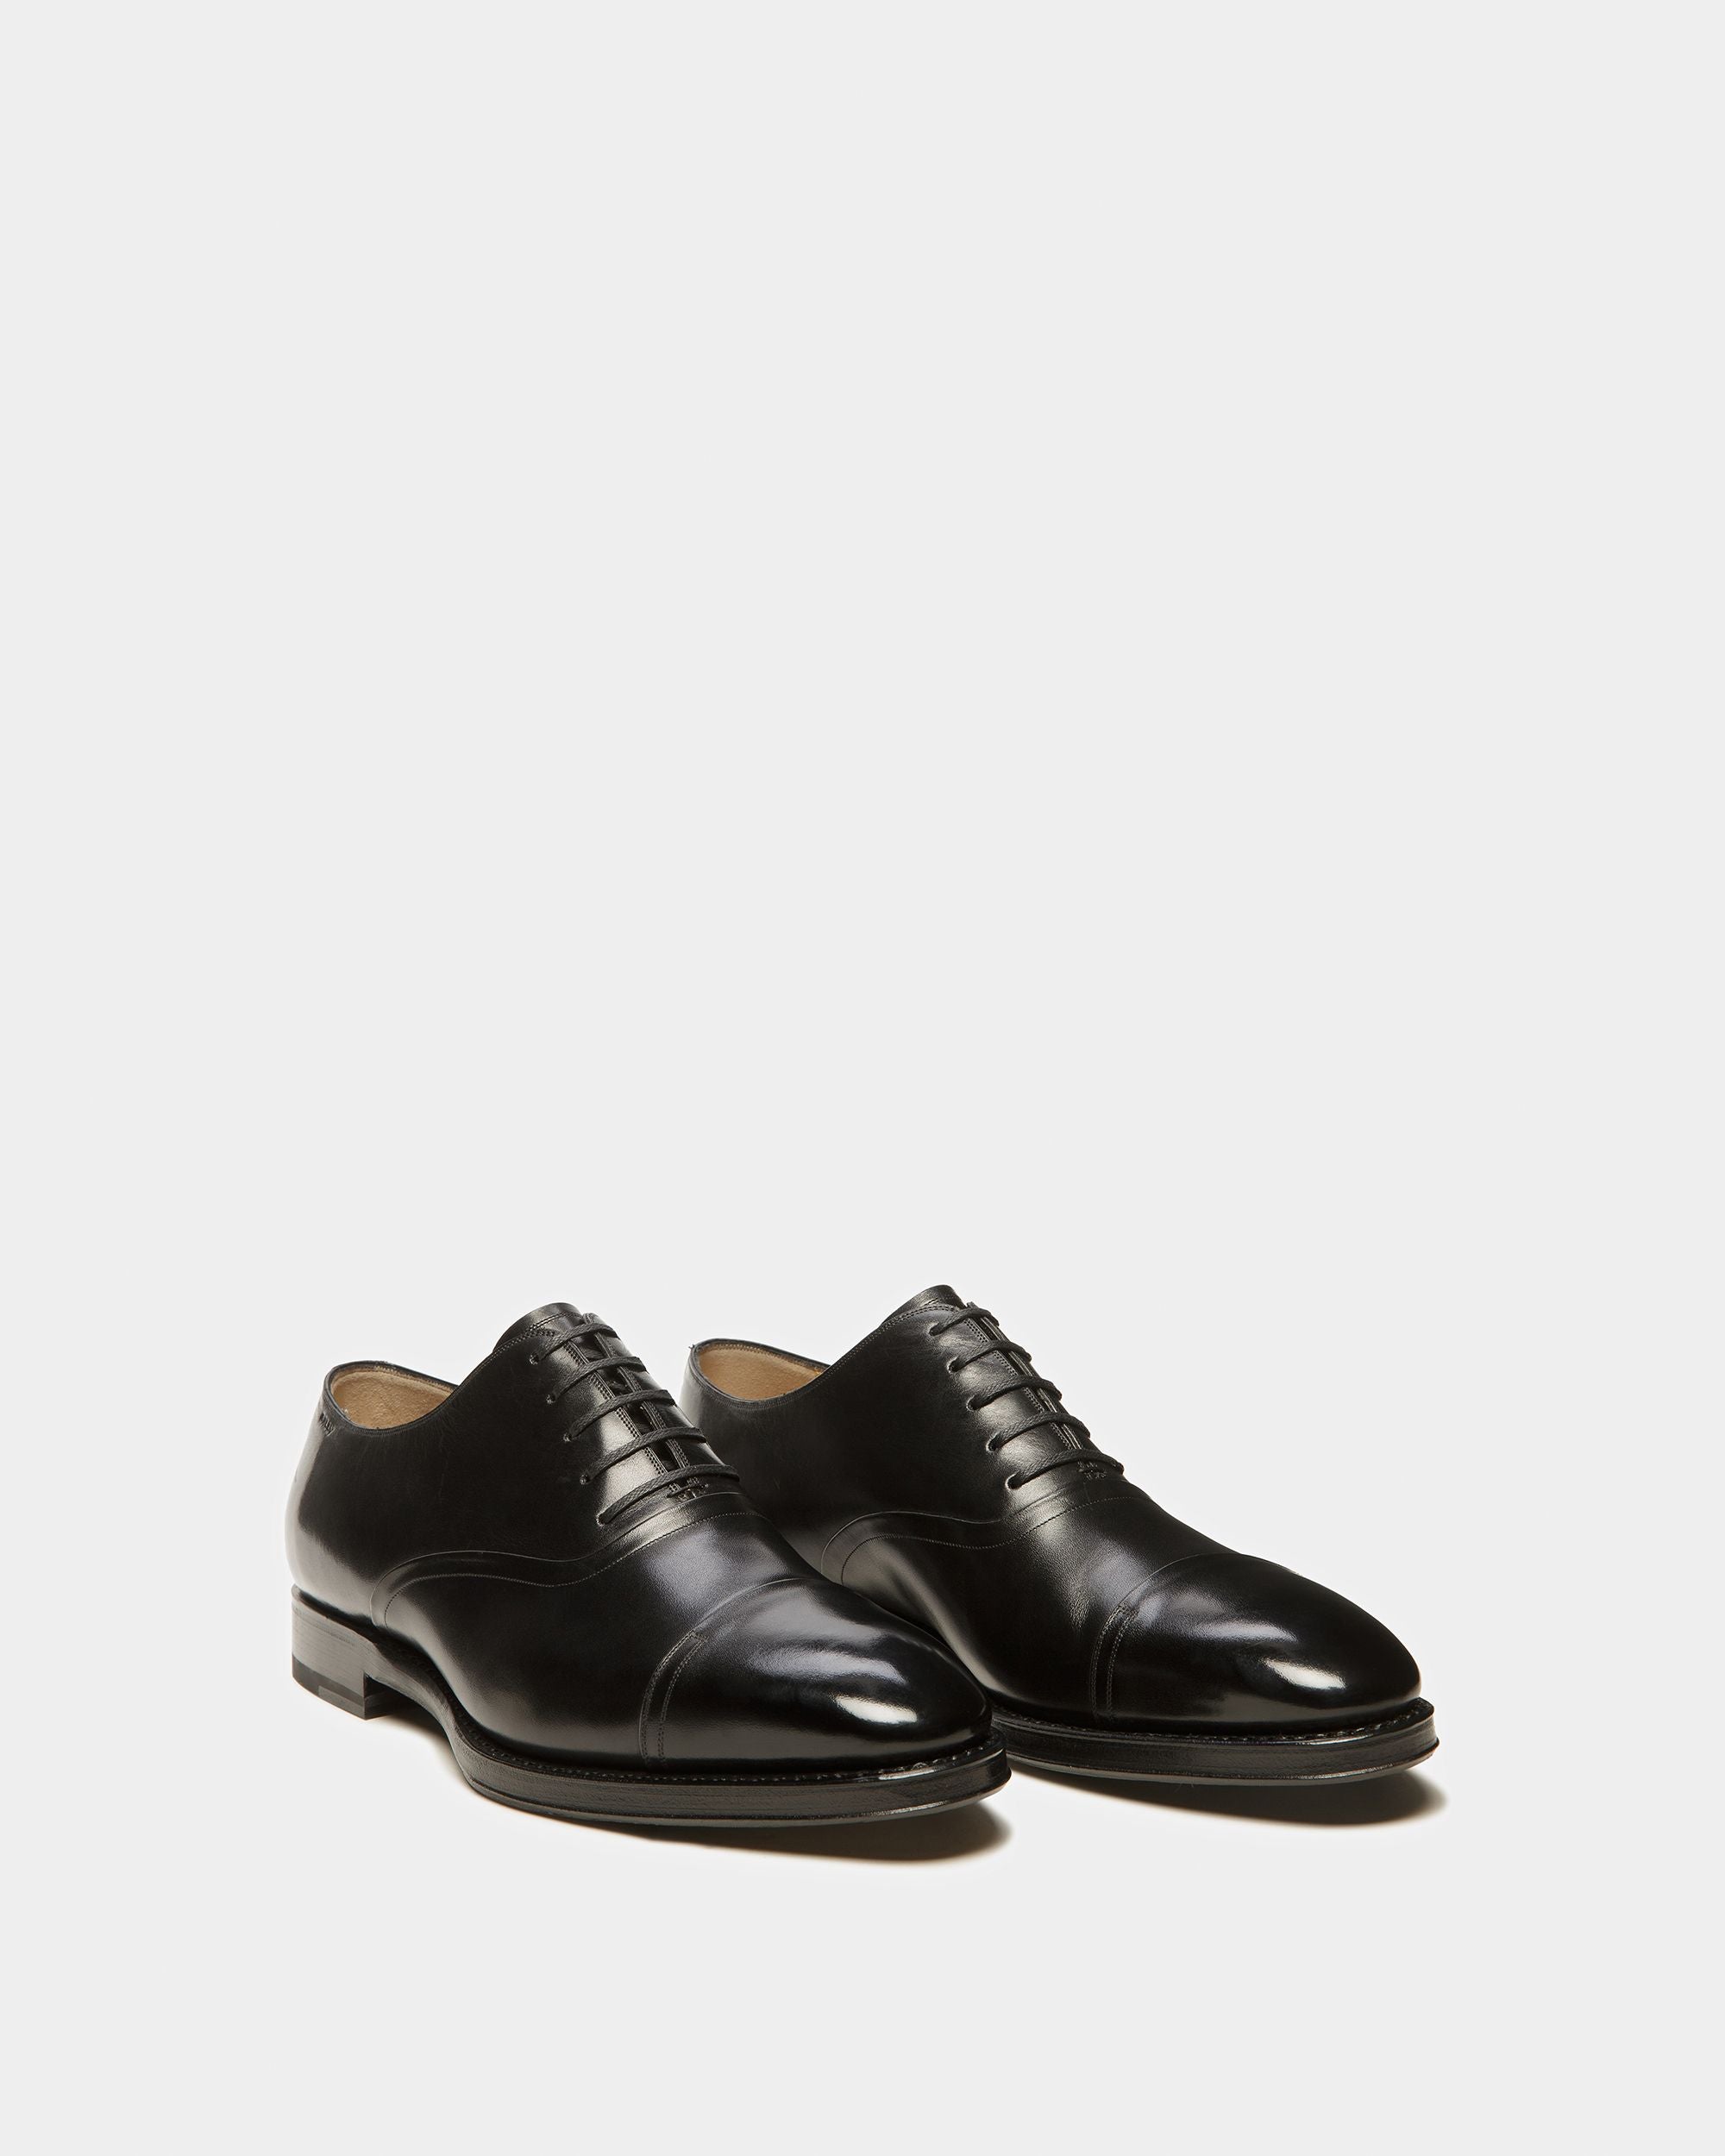 Selby | Men's Oxford Shoes | Black Leather | Still Life 3/4 Front